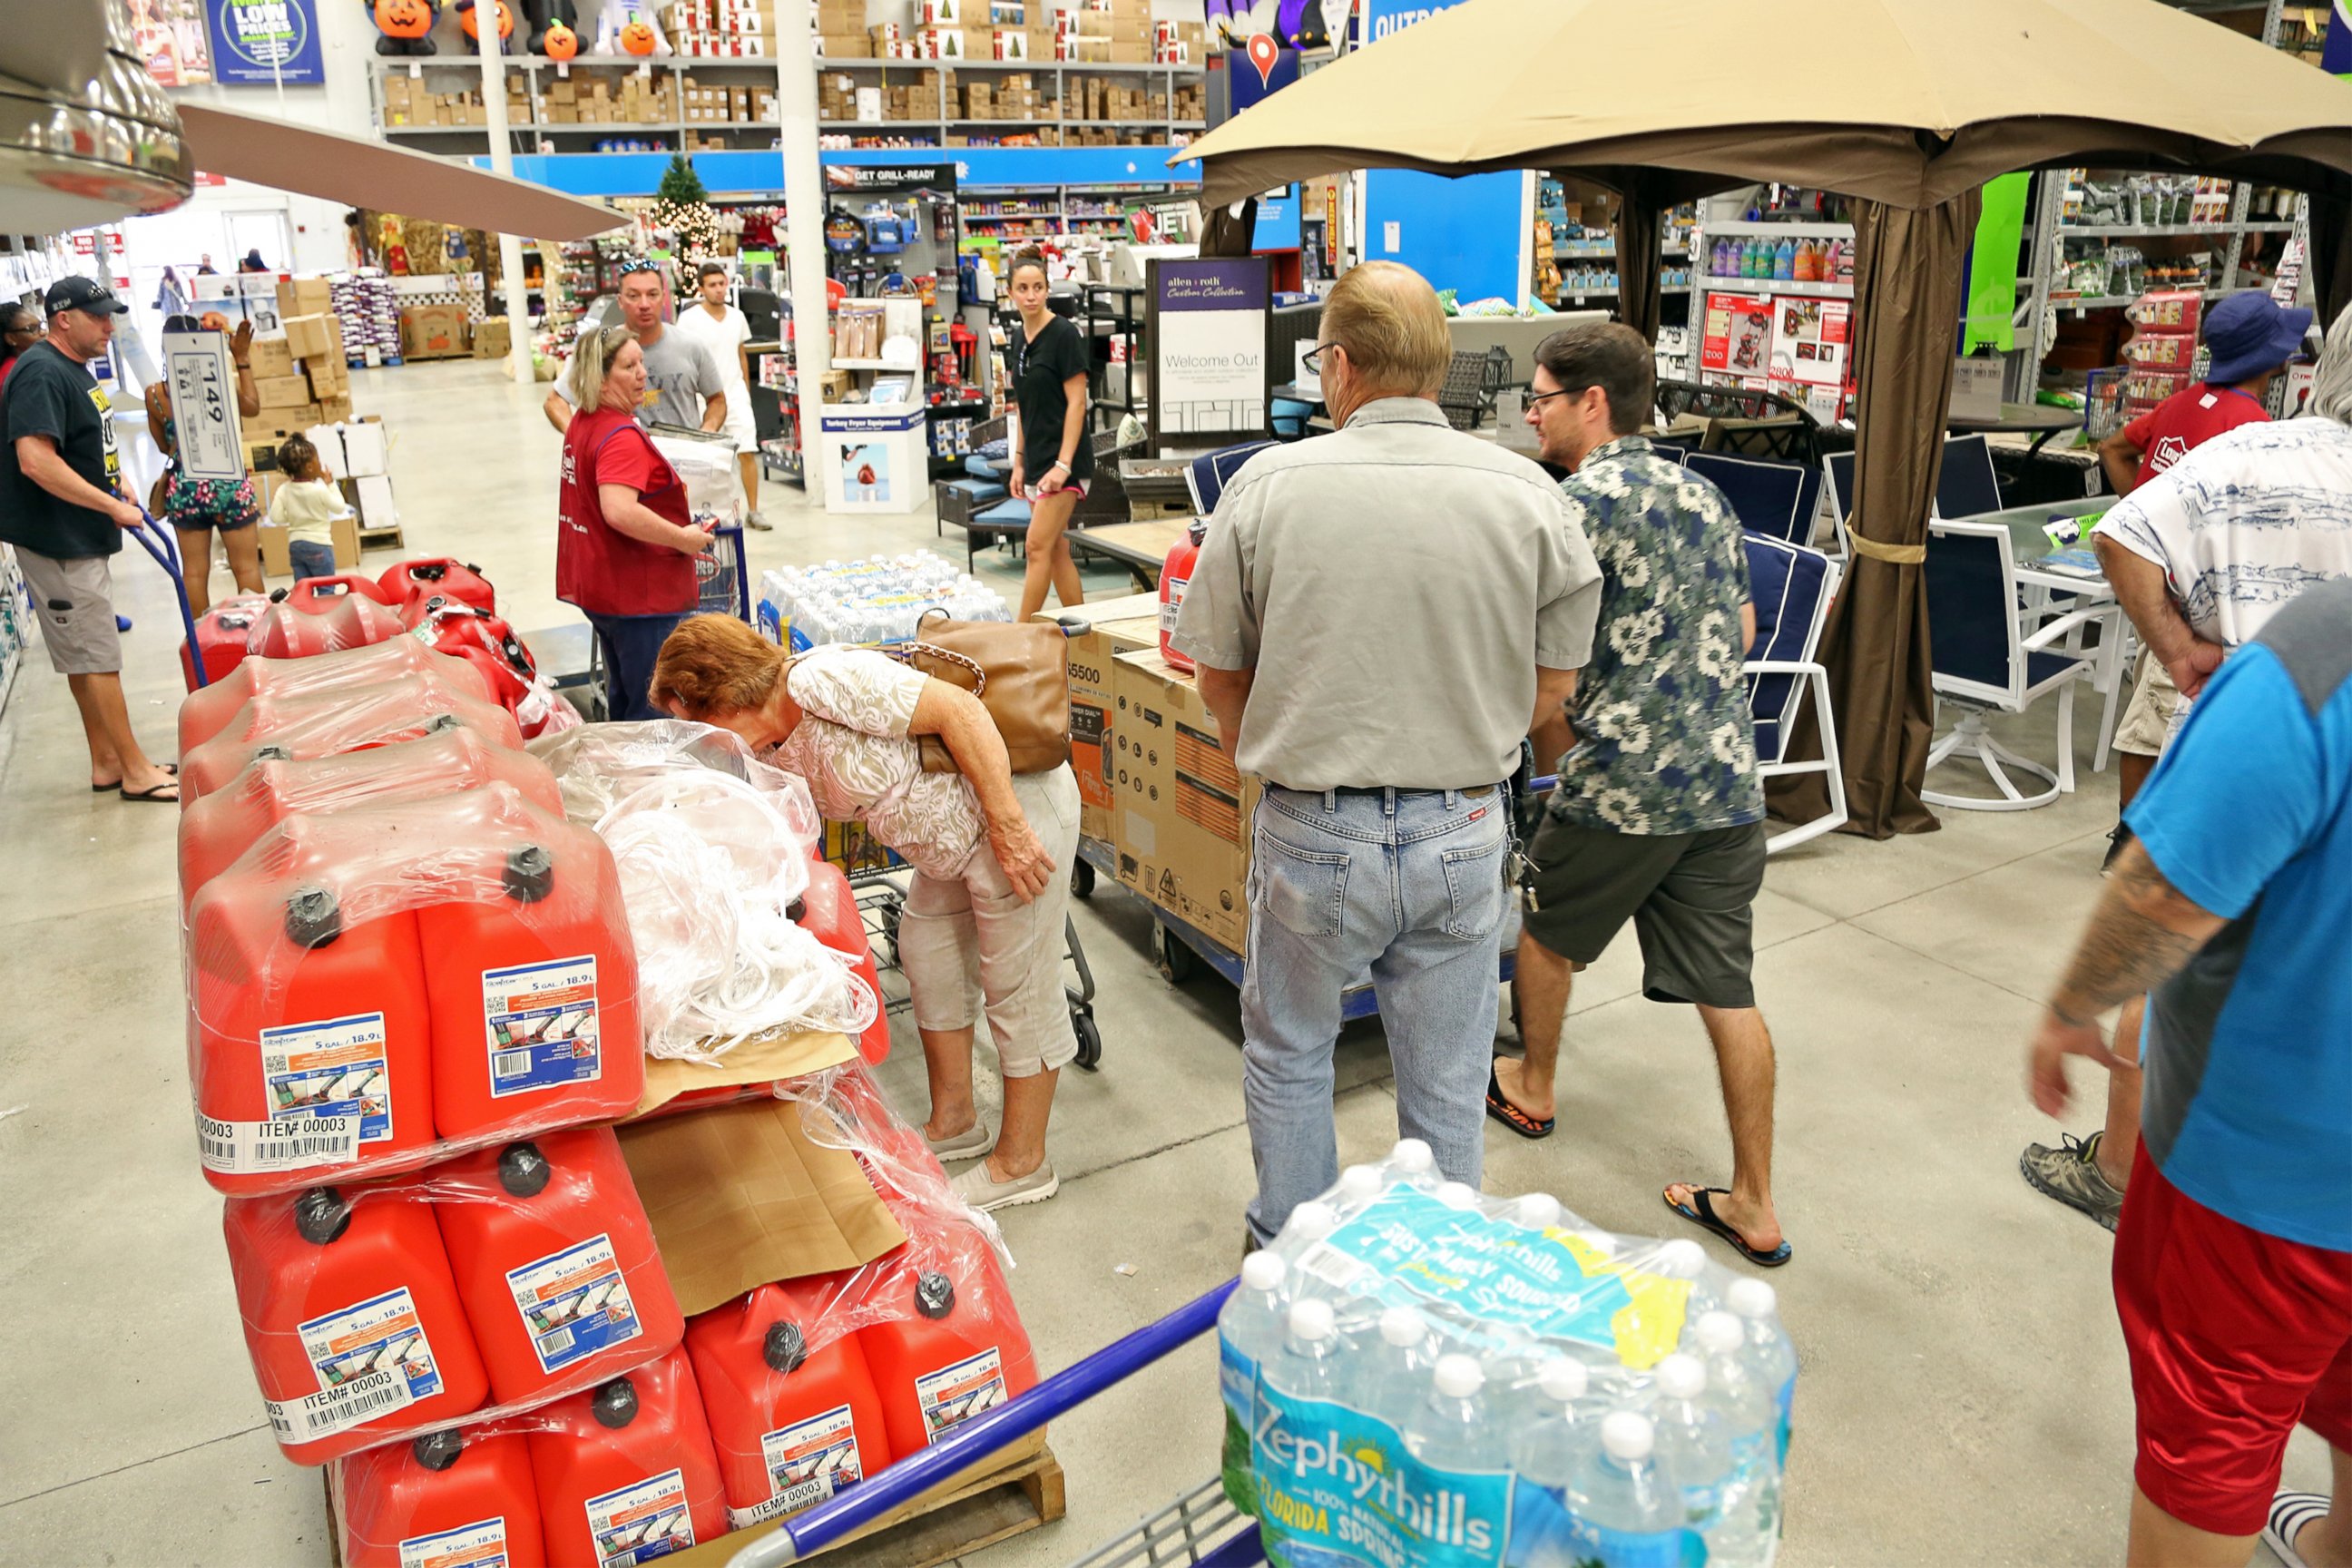 PHOTO: Shoppers look for items amid the generators, cases of water and gas cans at Lowe's in Oakland Park, Florida, Oct. 4, 2016.